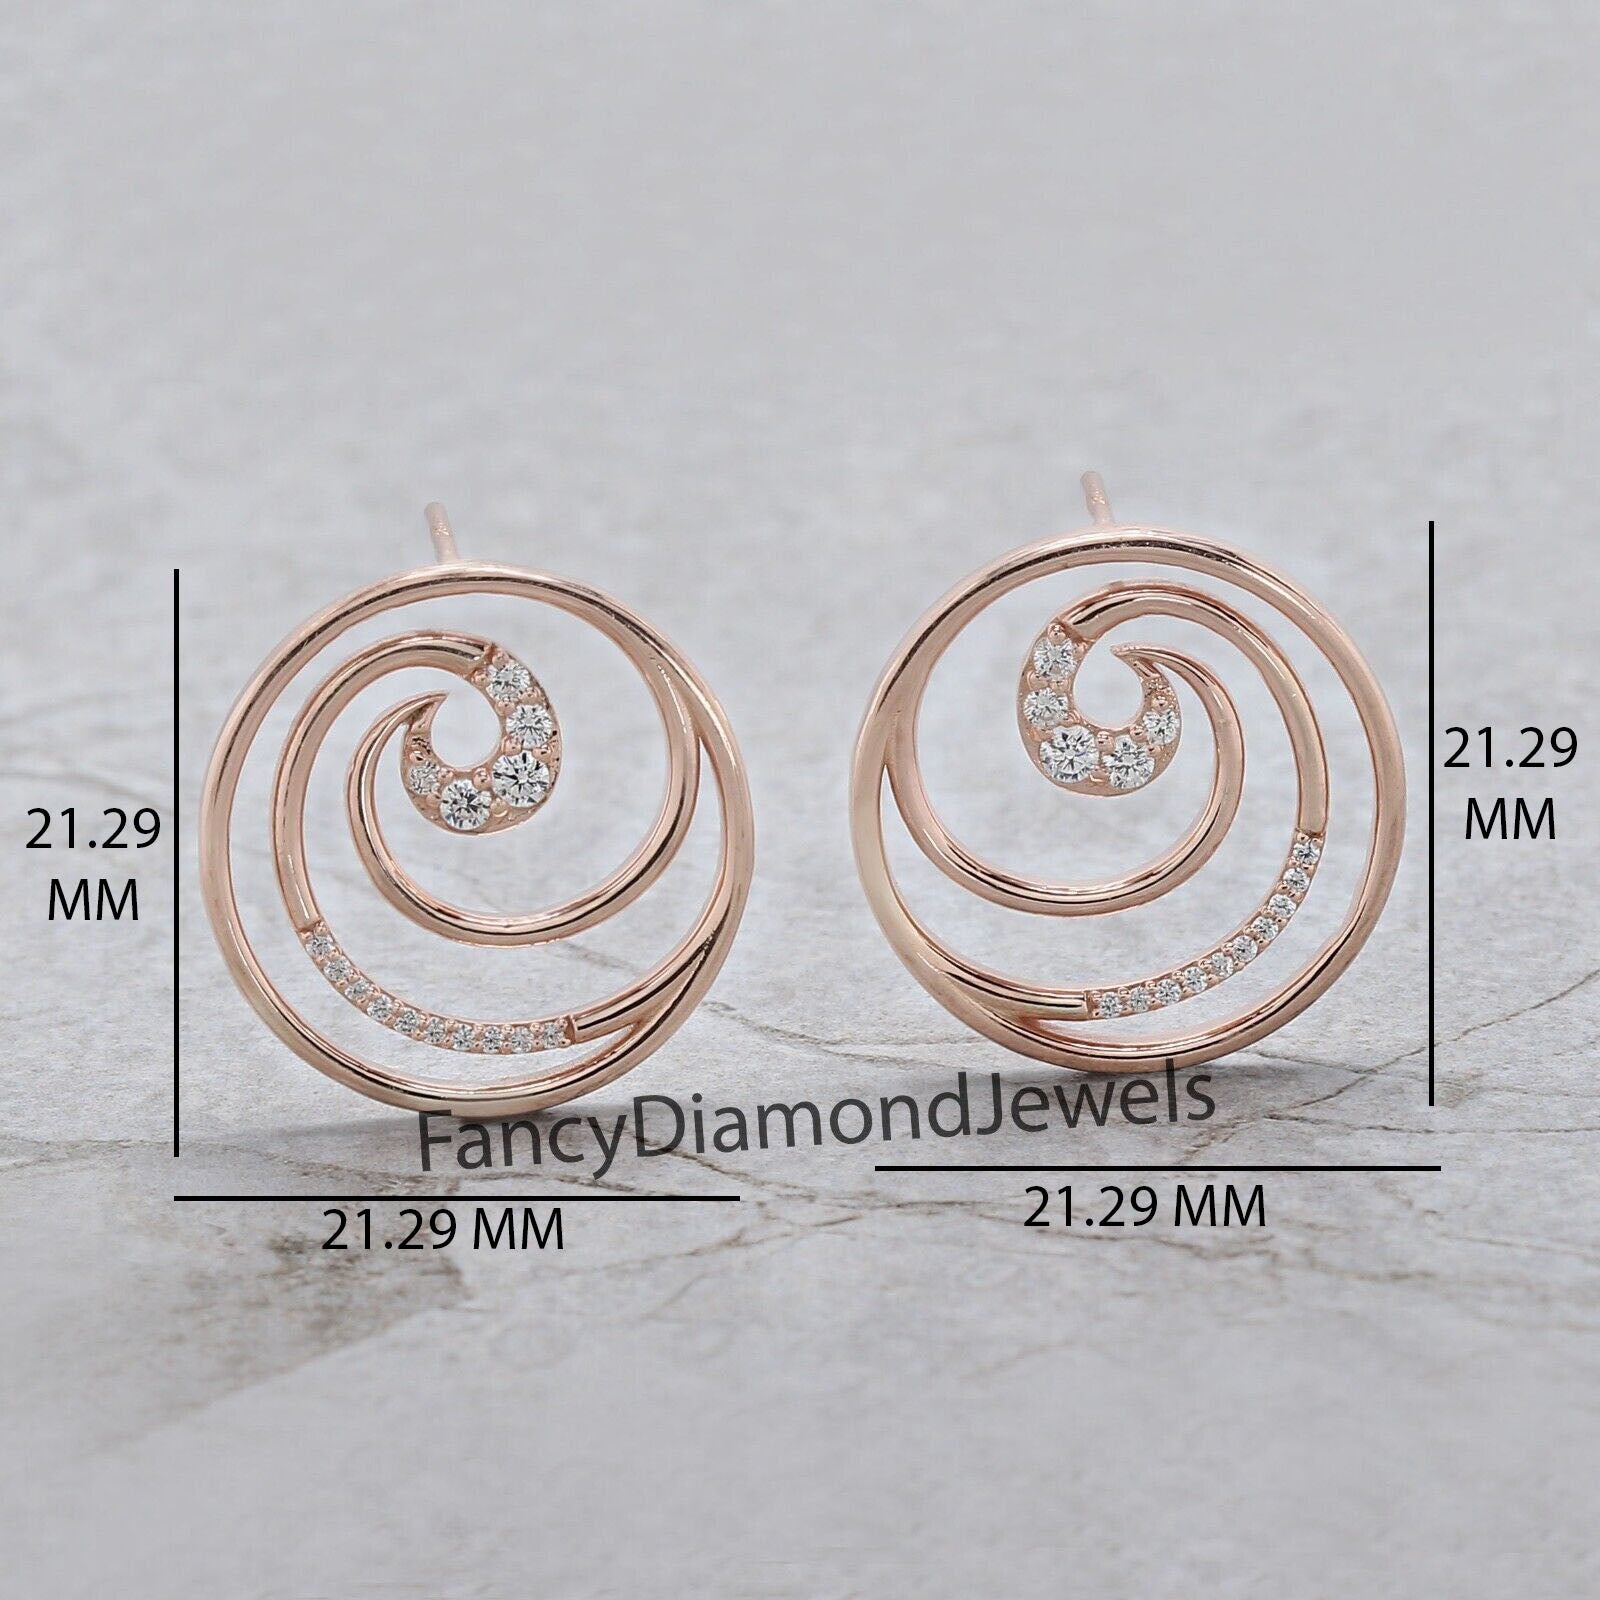 Round White Color Diamond Earring Engagement Wedding Gift Earring 14K Solid Rose White Yellow Gold Earring 0.35 CT KD990